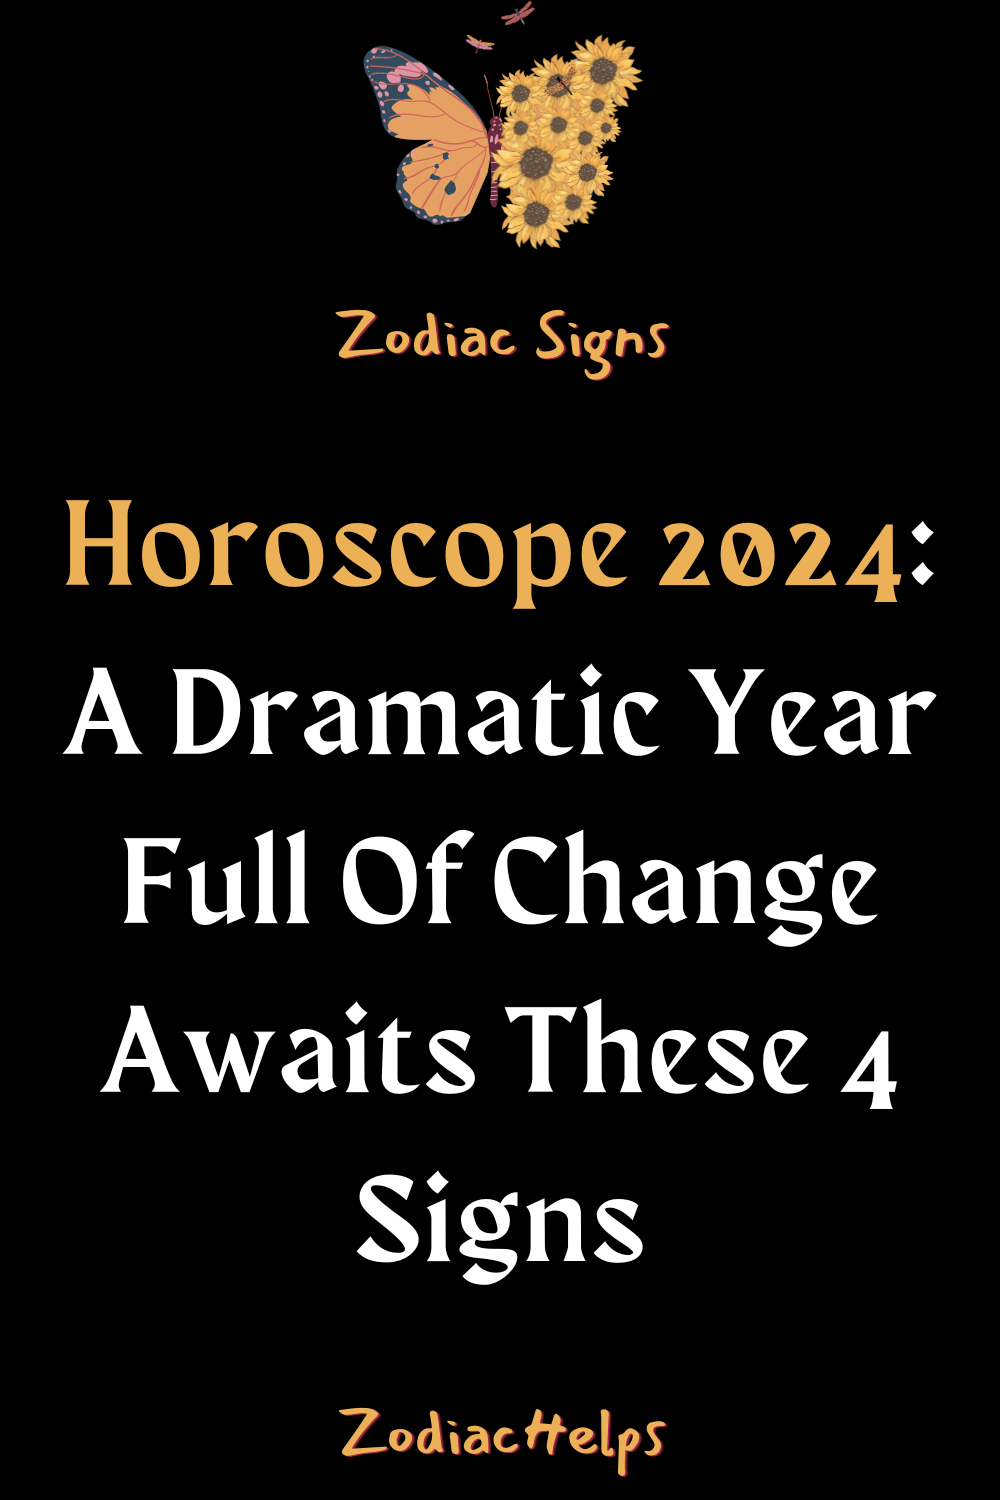 Horoscope 2024: A Dramatic Year Full Of Change Awaits These 4 Signs